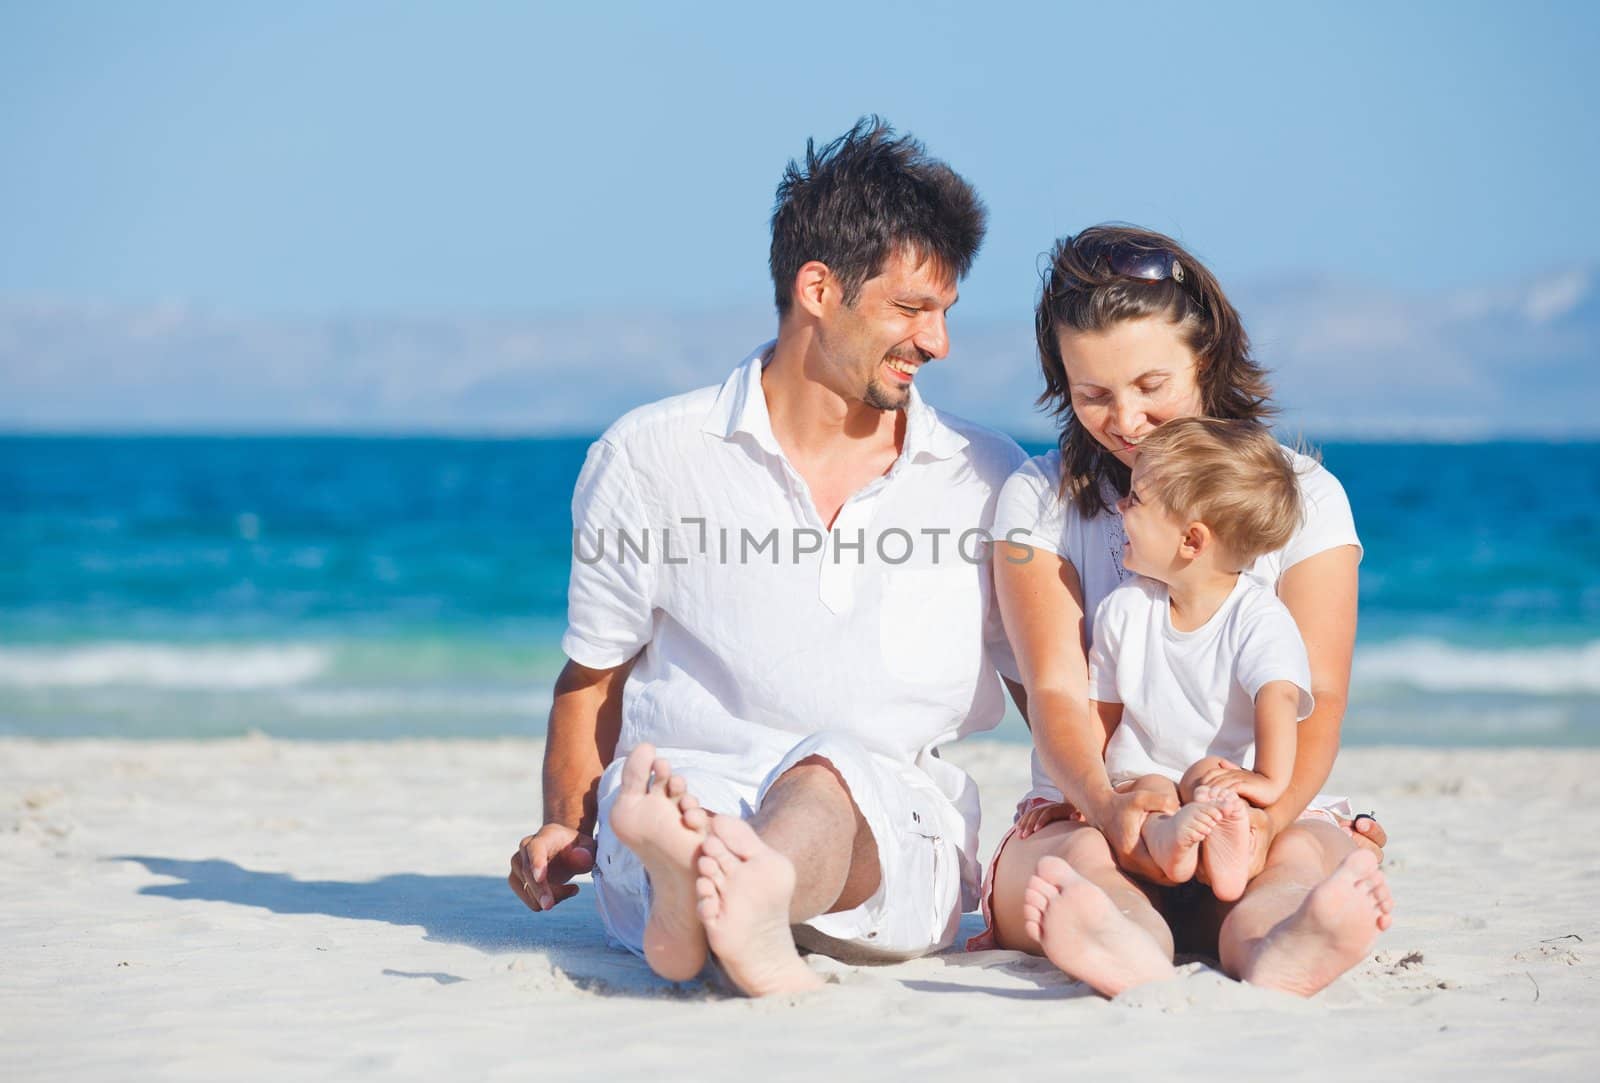 Happy family of three sitting and having fun on tropical beach